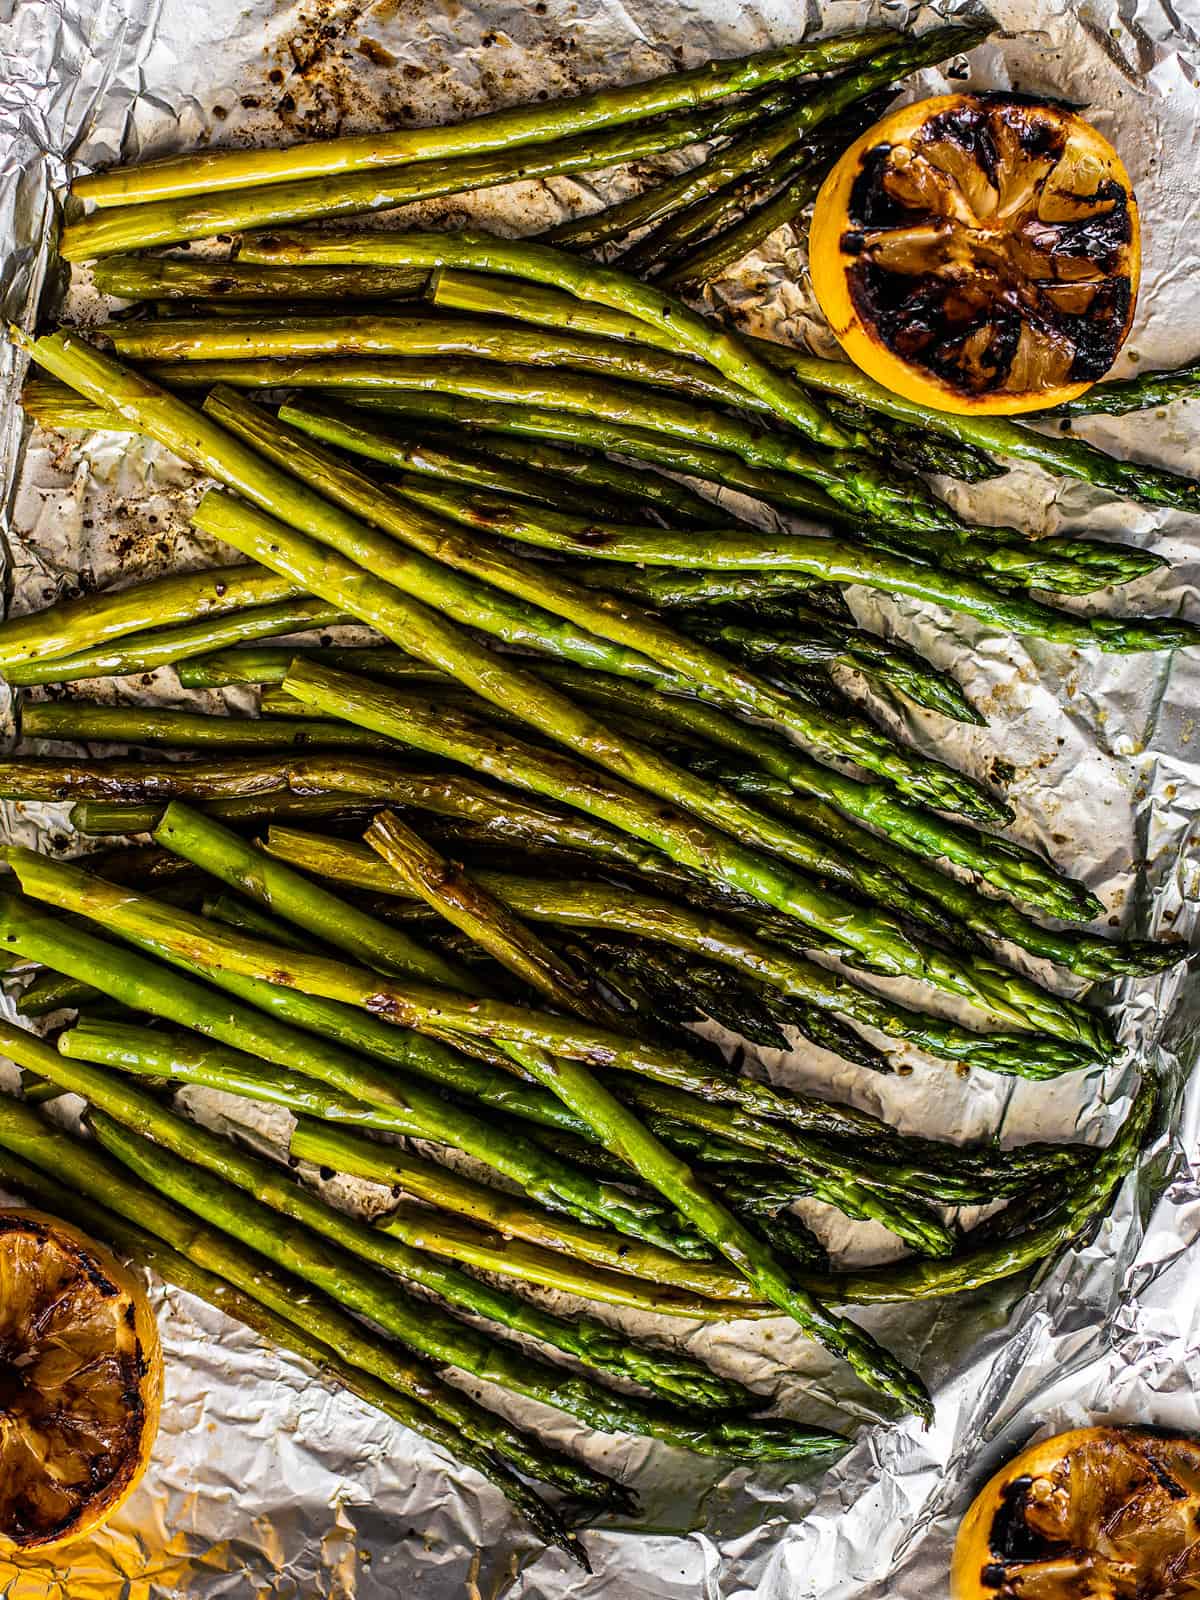 Grilled Asparagus with Grilled Lemon on a tin foil lined baking sheet.